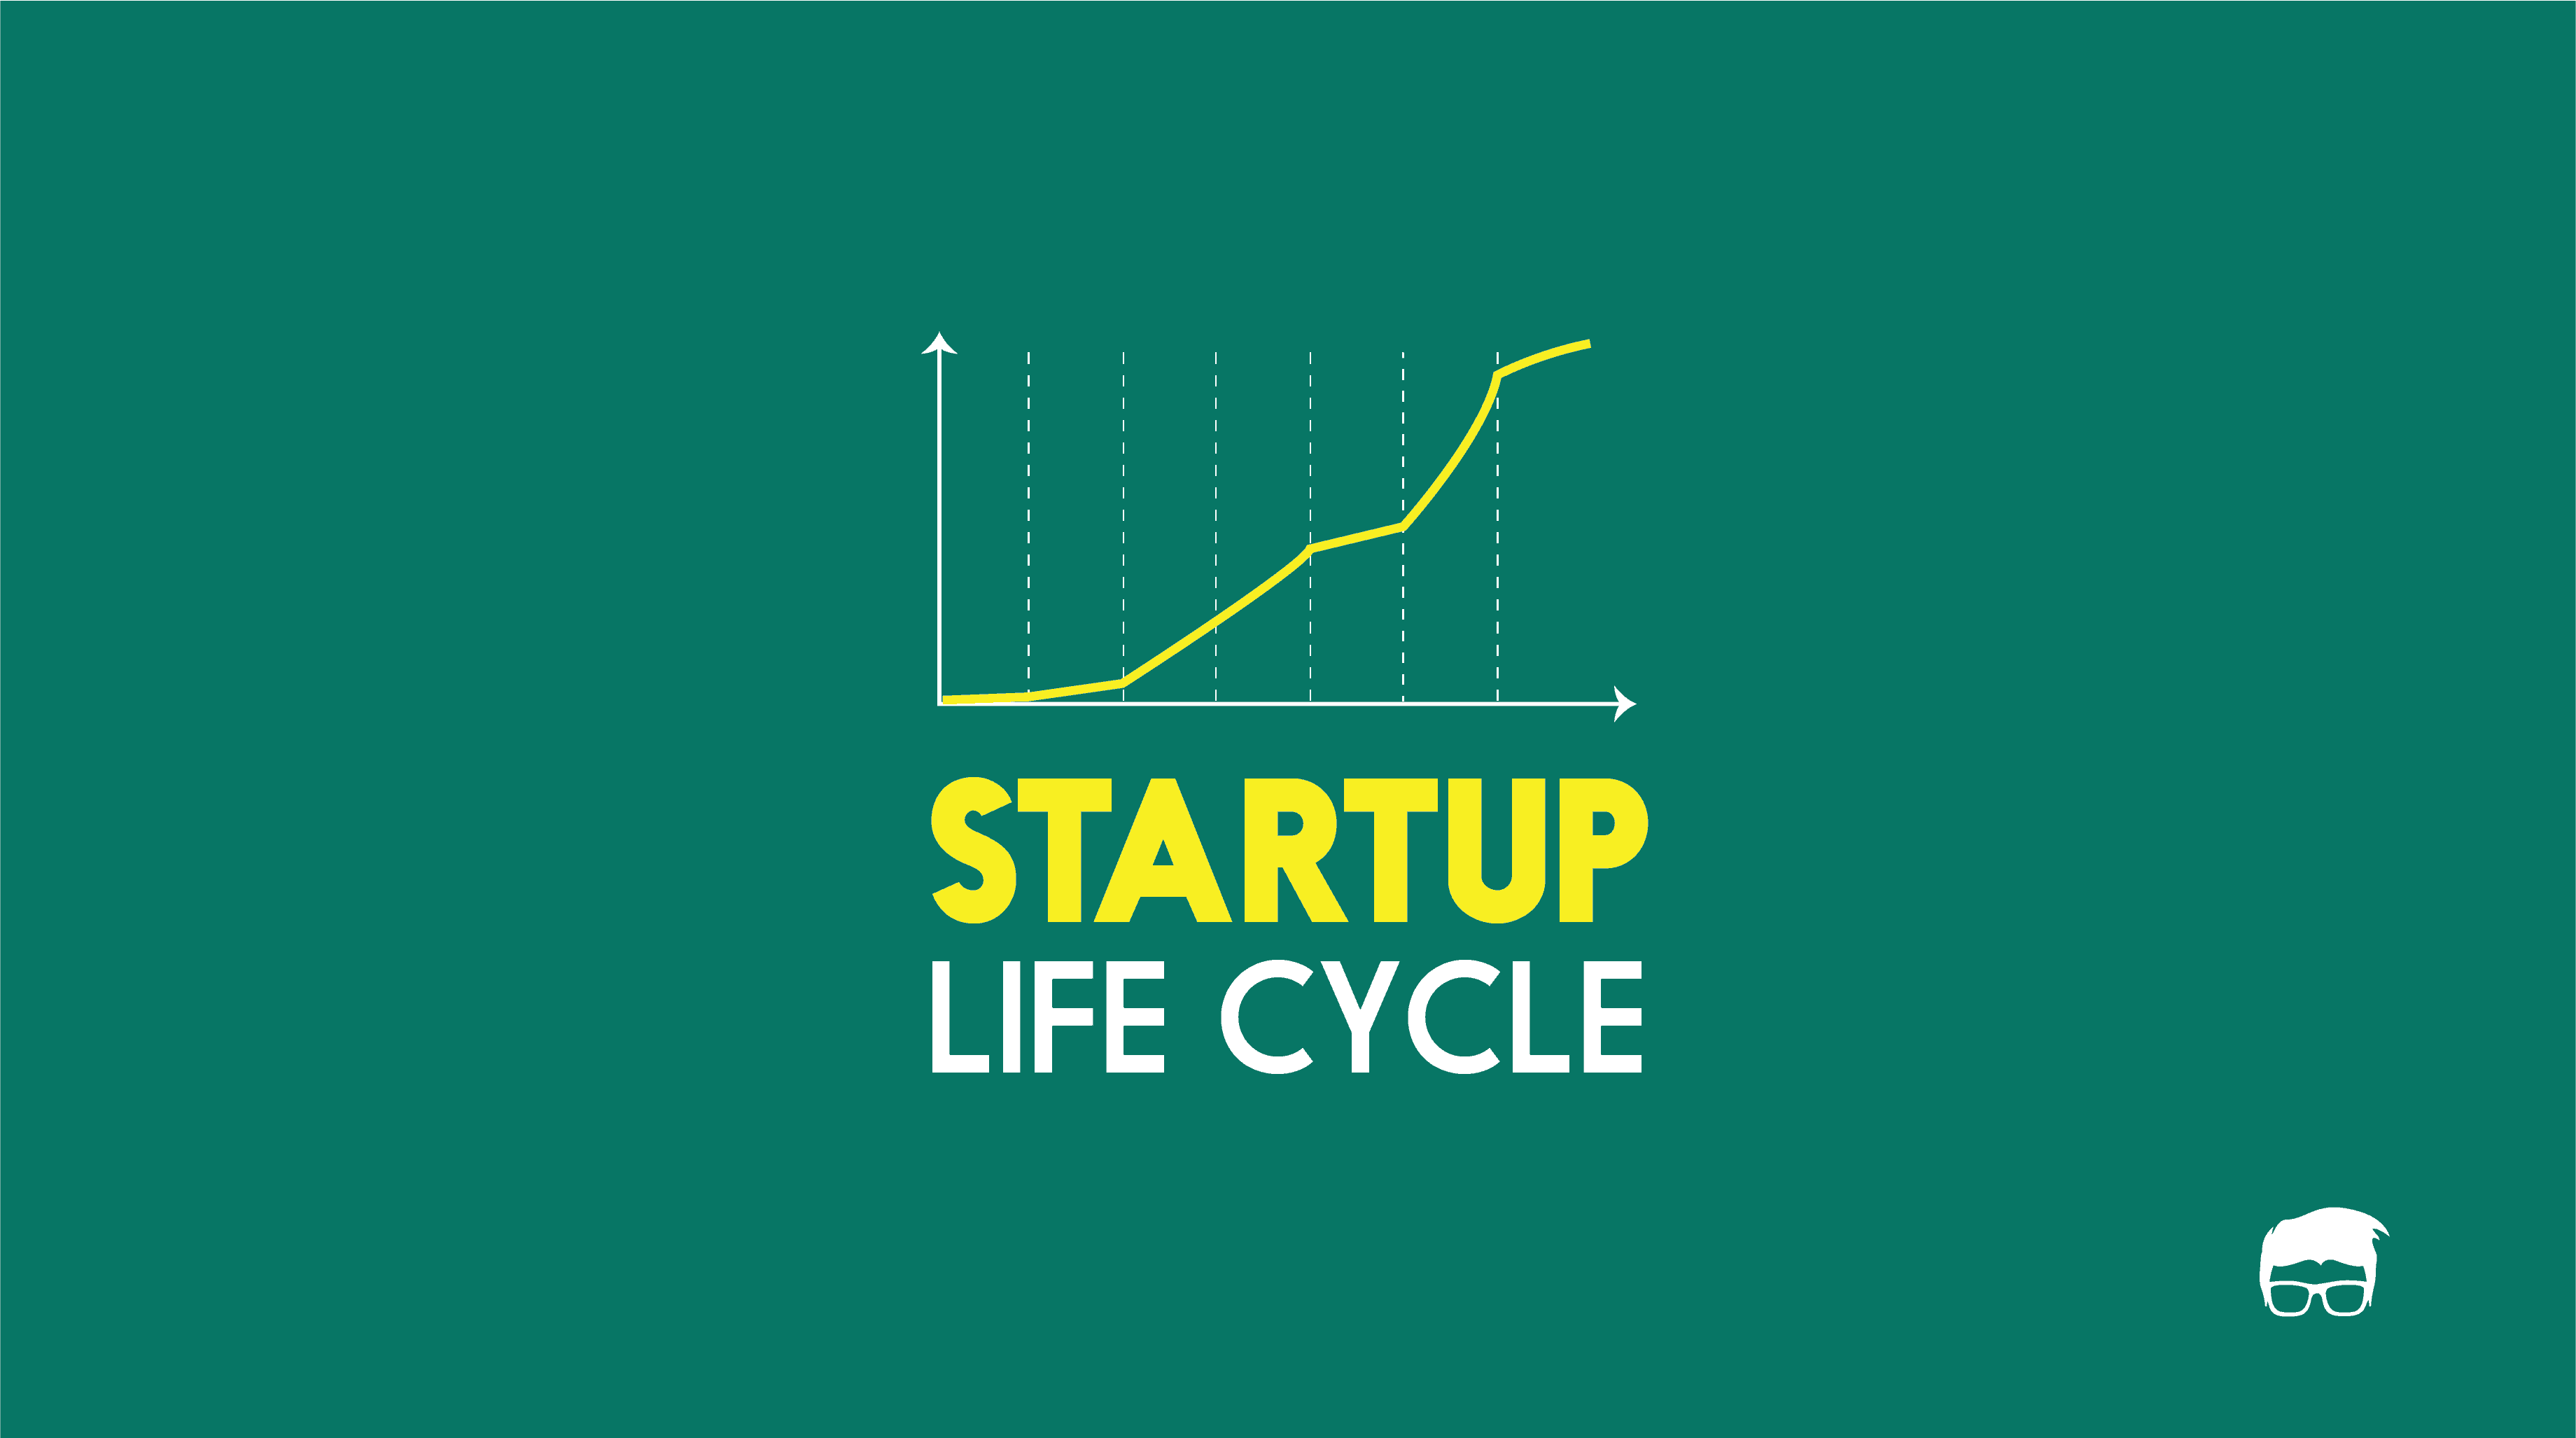 The Startup Life Cycle